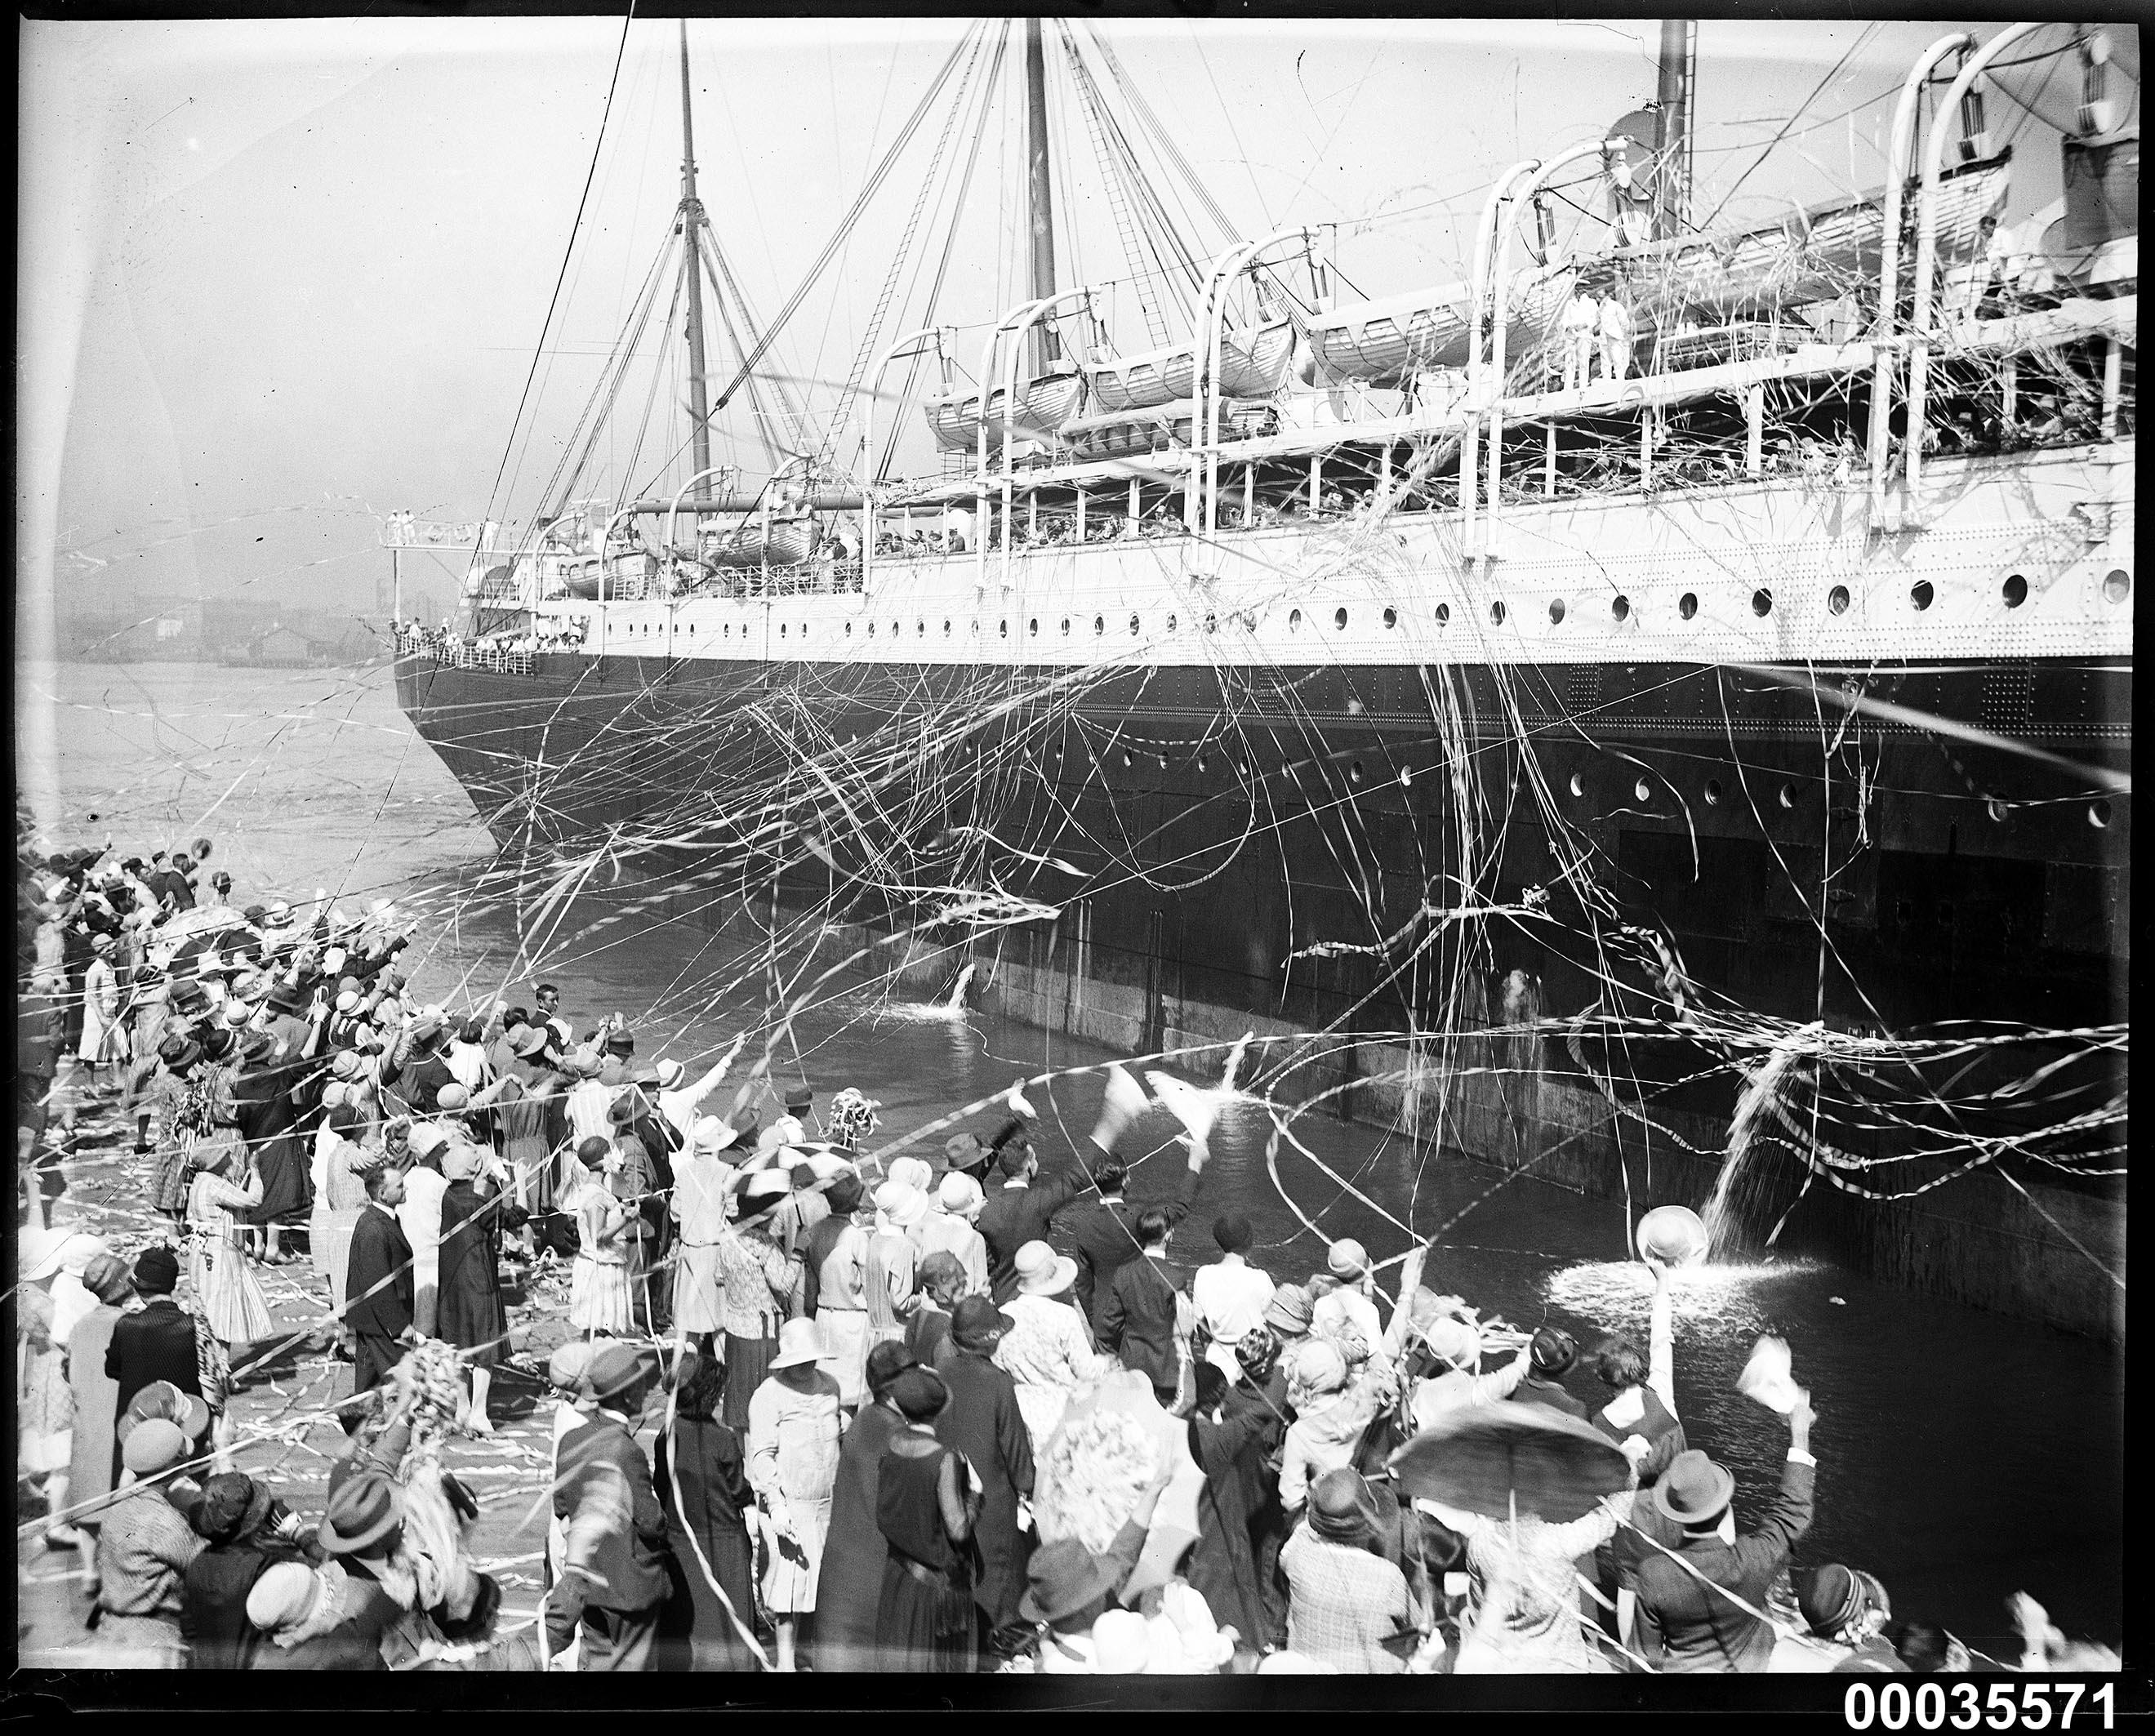 SS CERAMIC departing the White Star Line wharf in Millers Point, with crowds and streamers, 1920-1939 (7869544302)